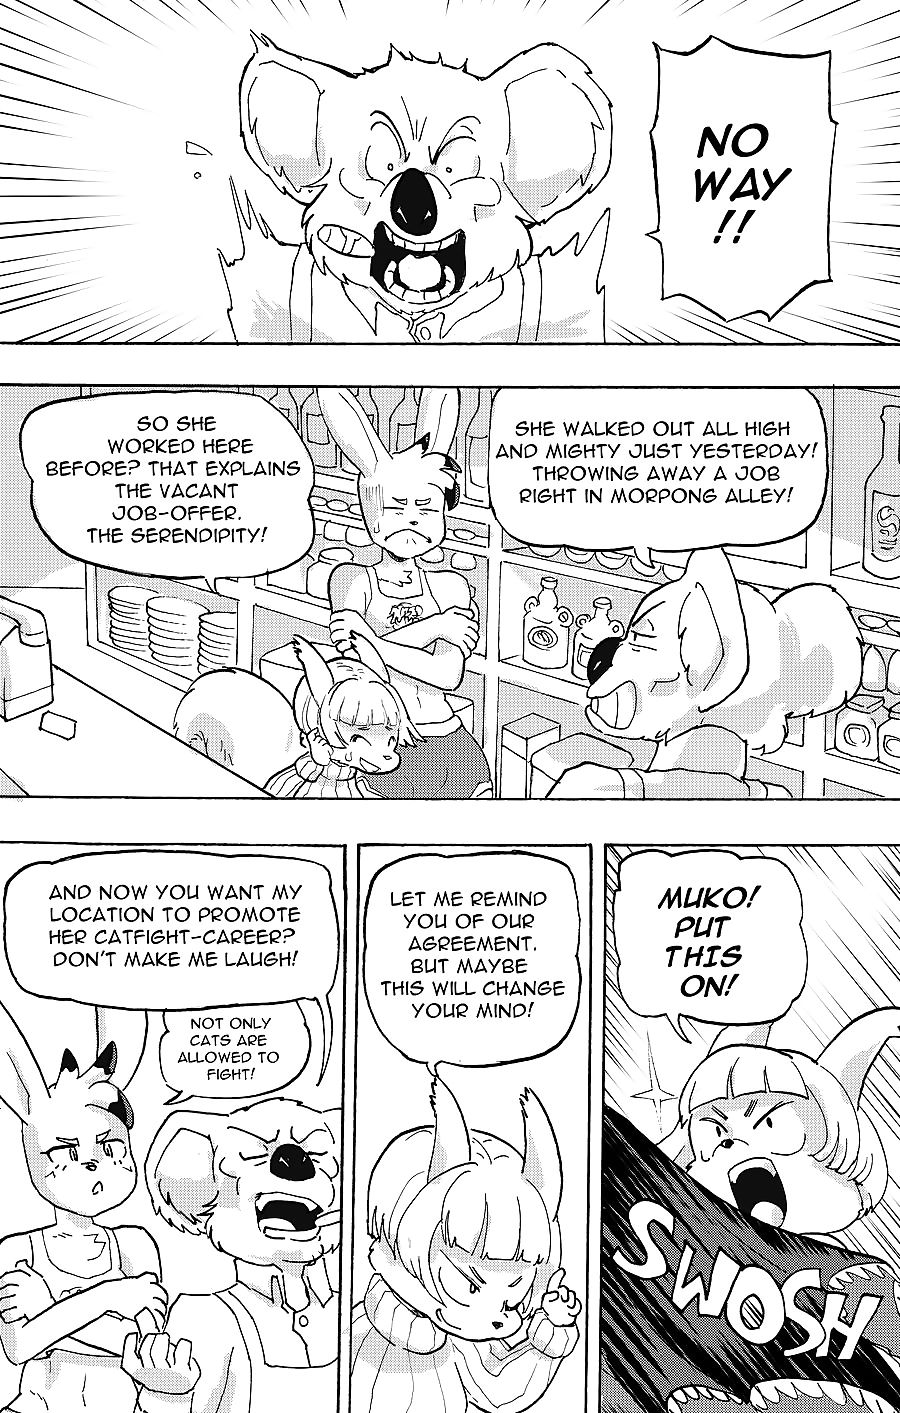 FFC: Furry Fight Chronicles - part 3